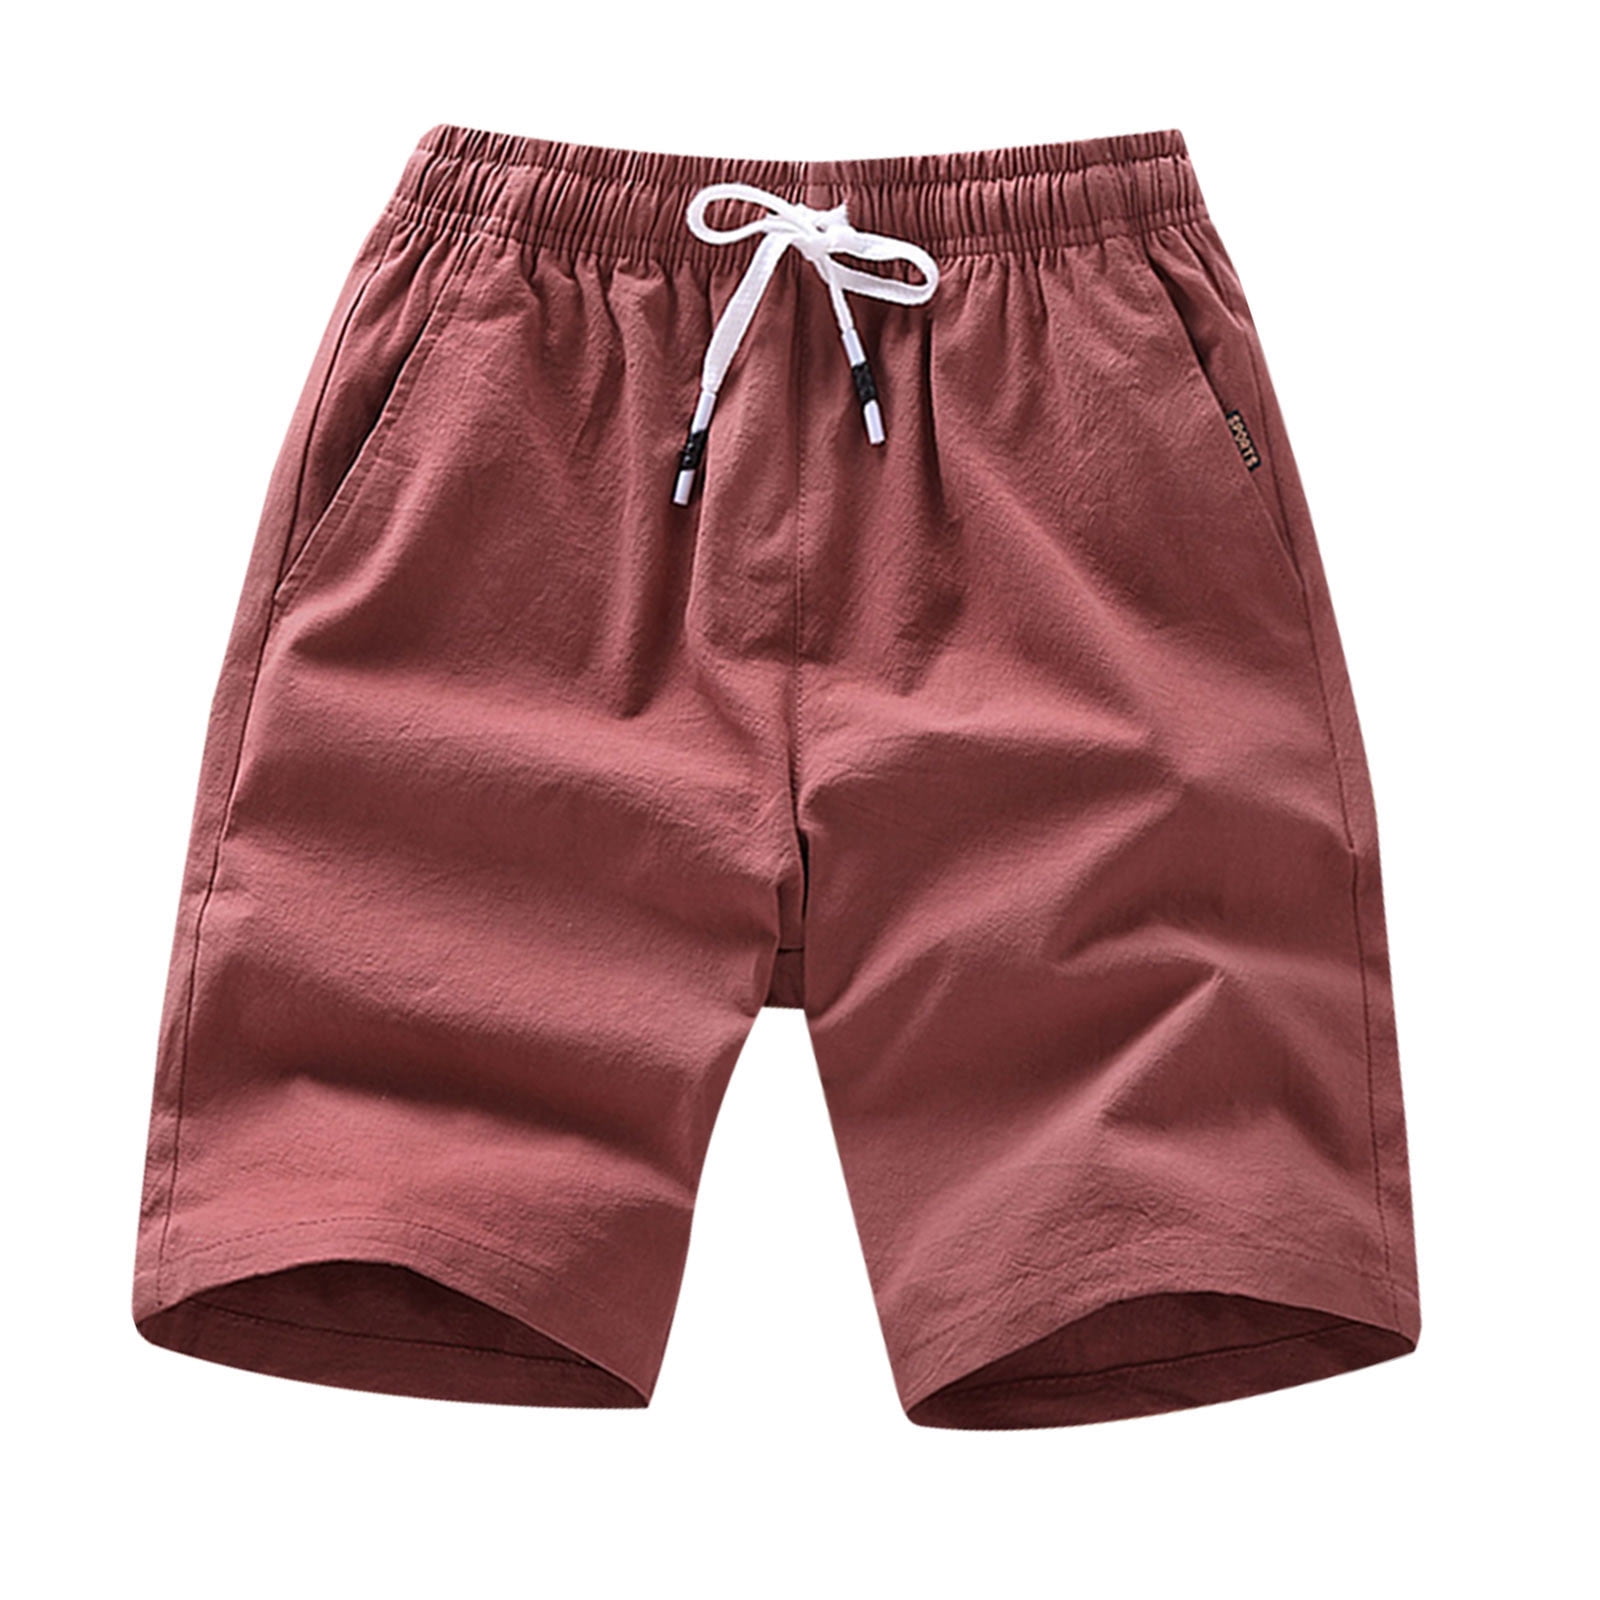 Jophufed Men's Pants Short Pants Made Of Pure Cotton Fabric Are Thin And  Breathable 